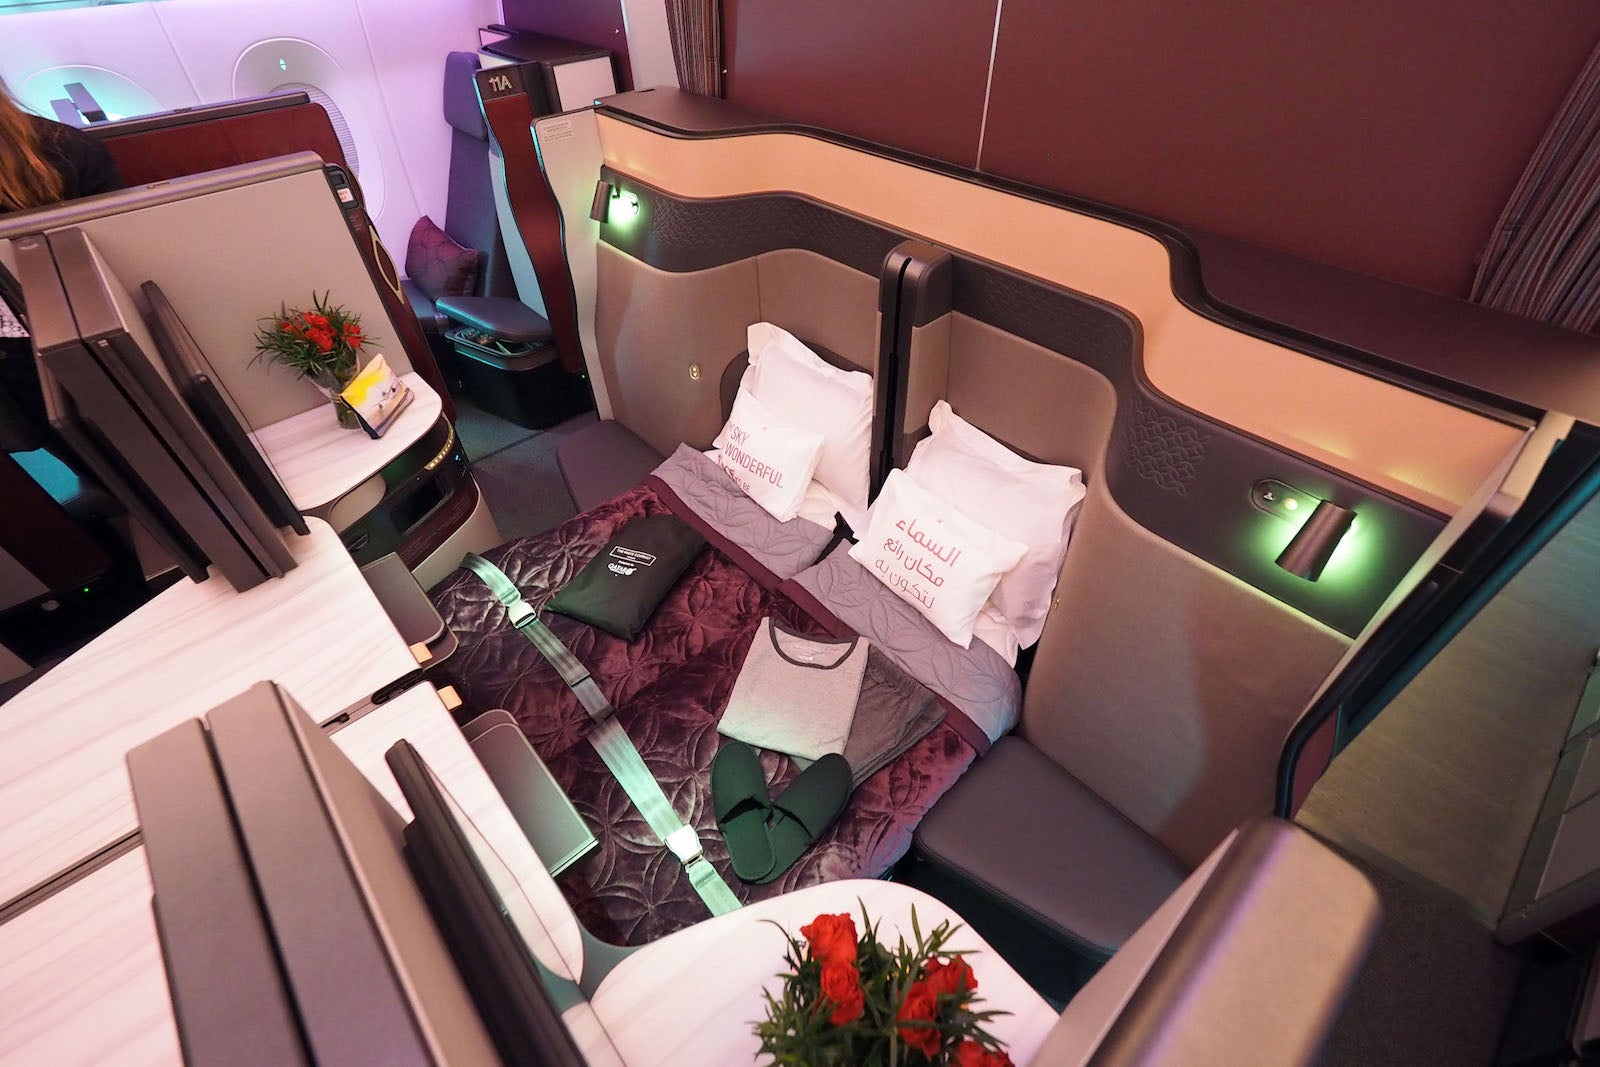 Qatar Airways developing new first class, QSuites business class: Report